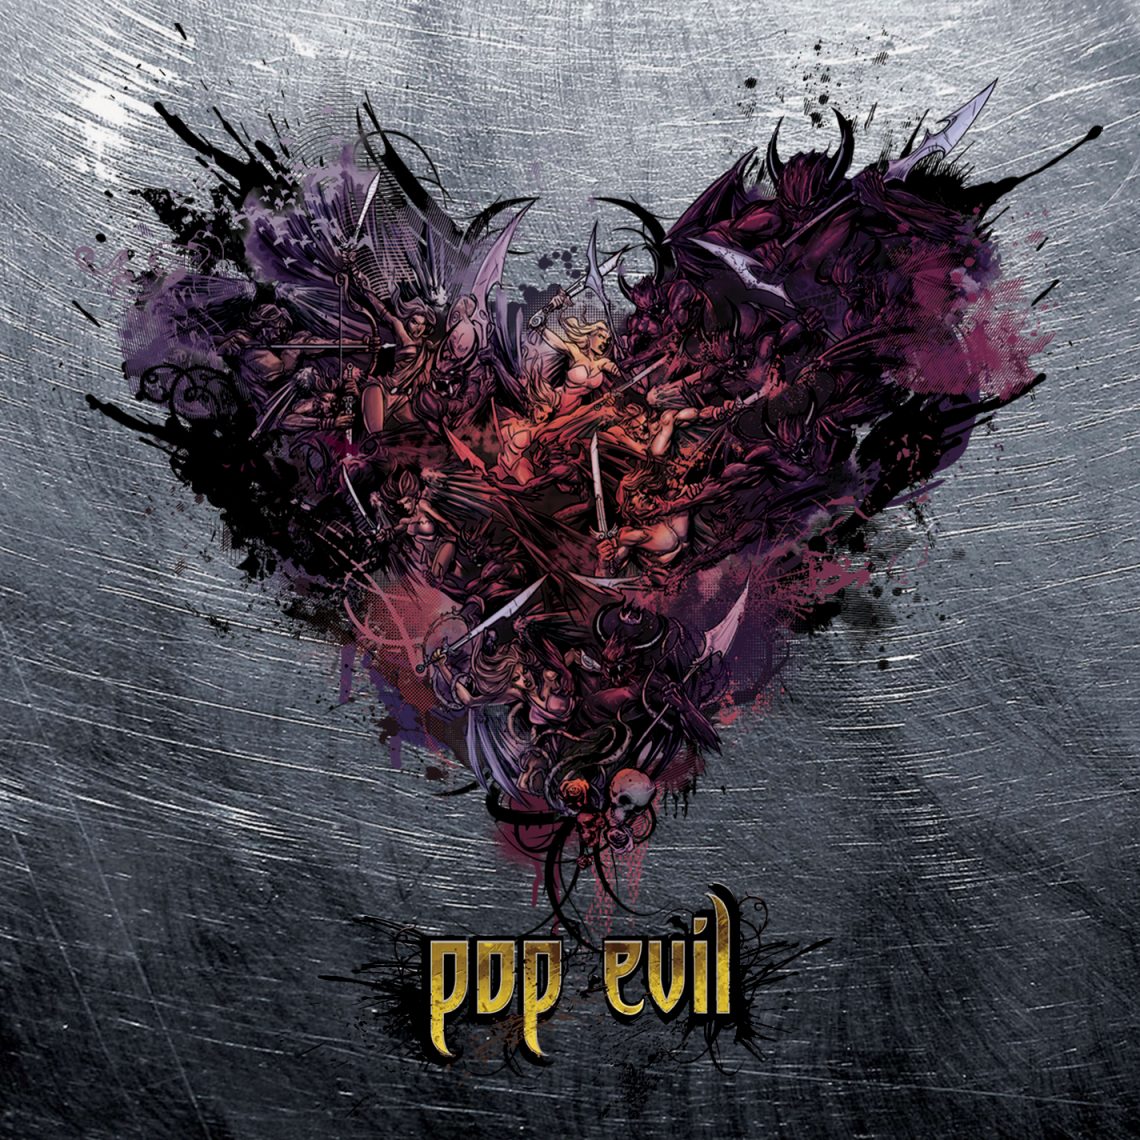 INTERVIEW WITH HAYLEY & LEIGH OF POP EVIL